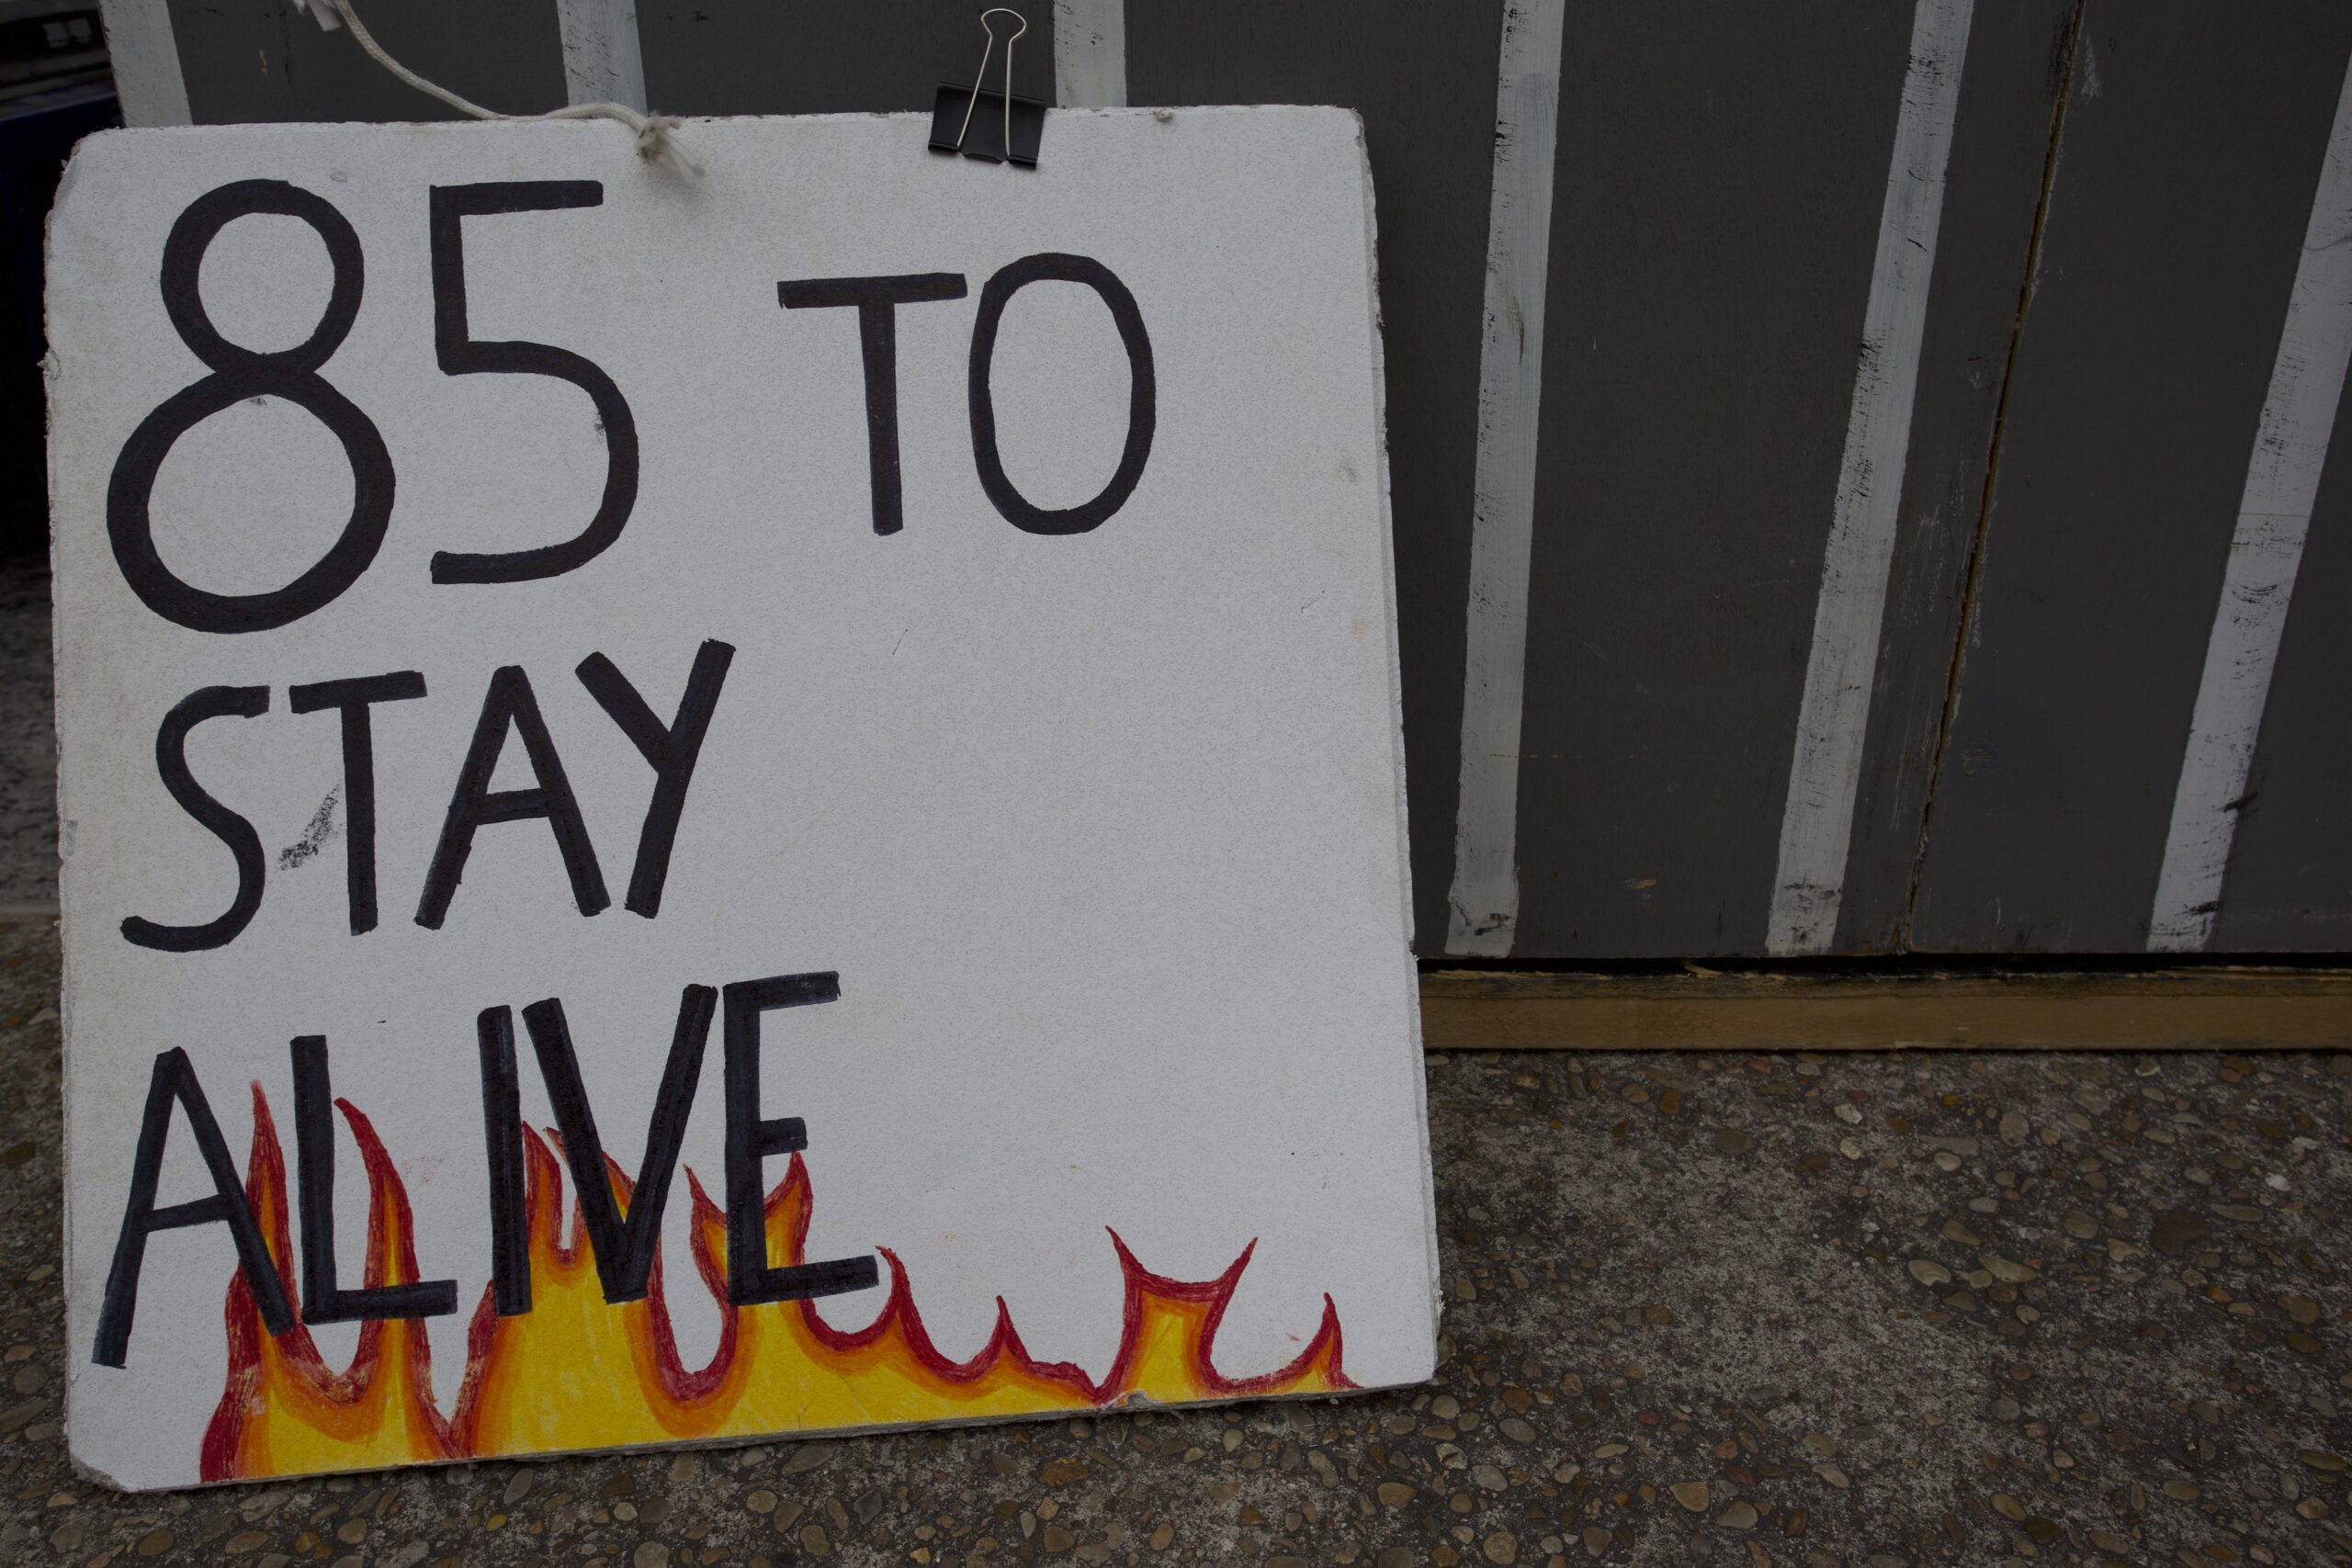 A sign with hand-drawn flames reads "85 to stay alive"